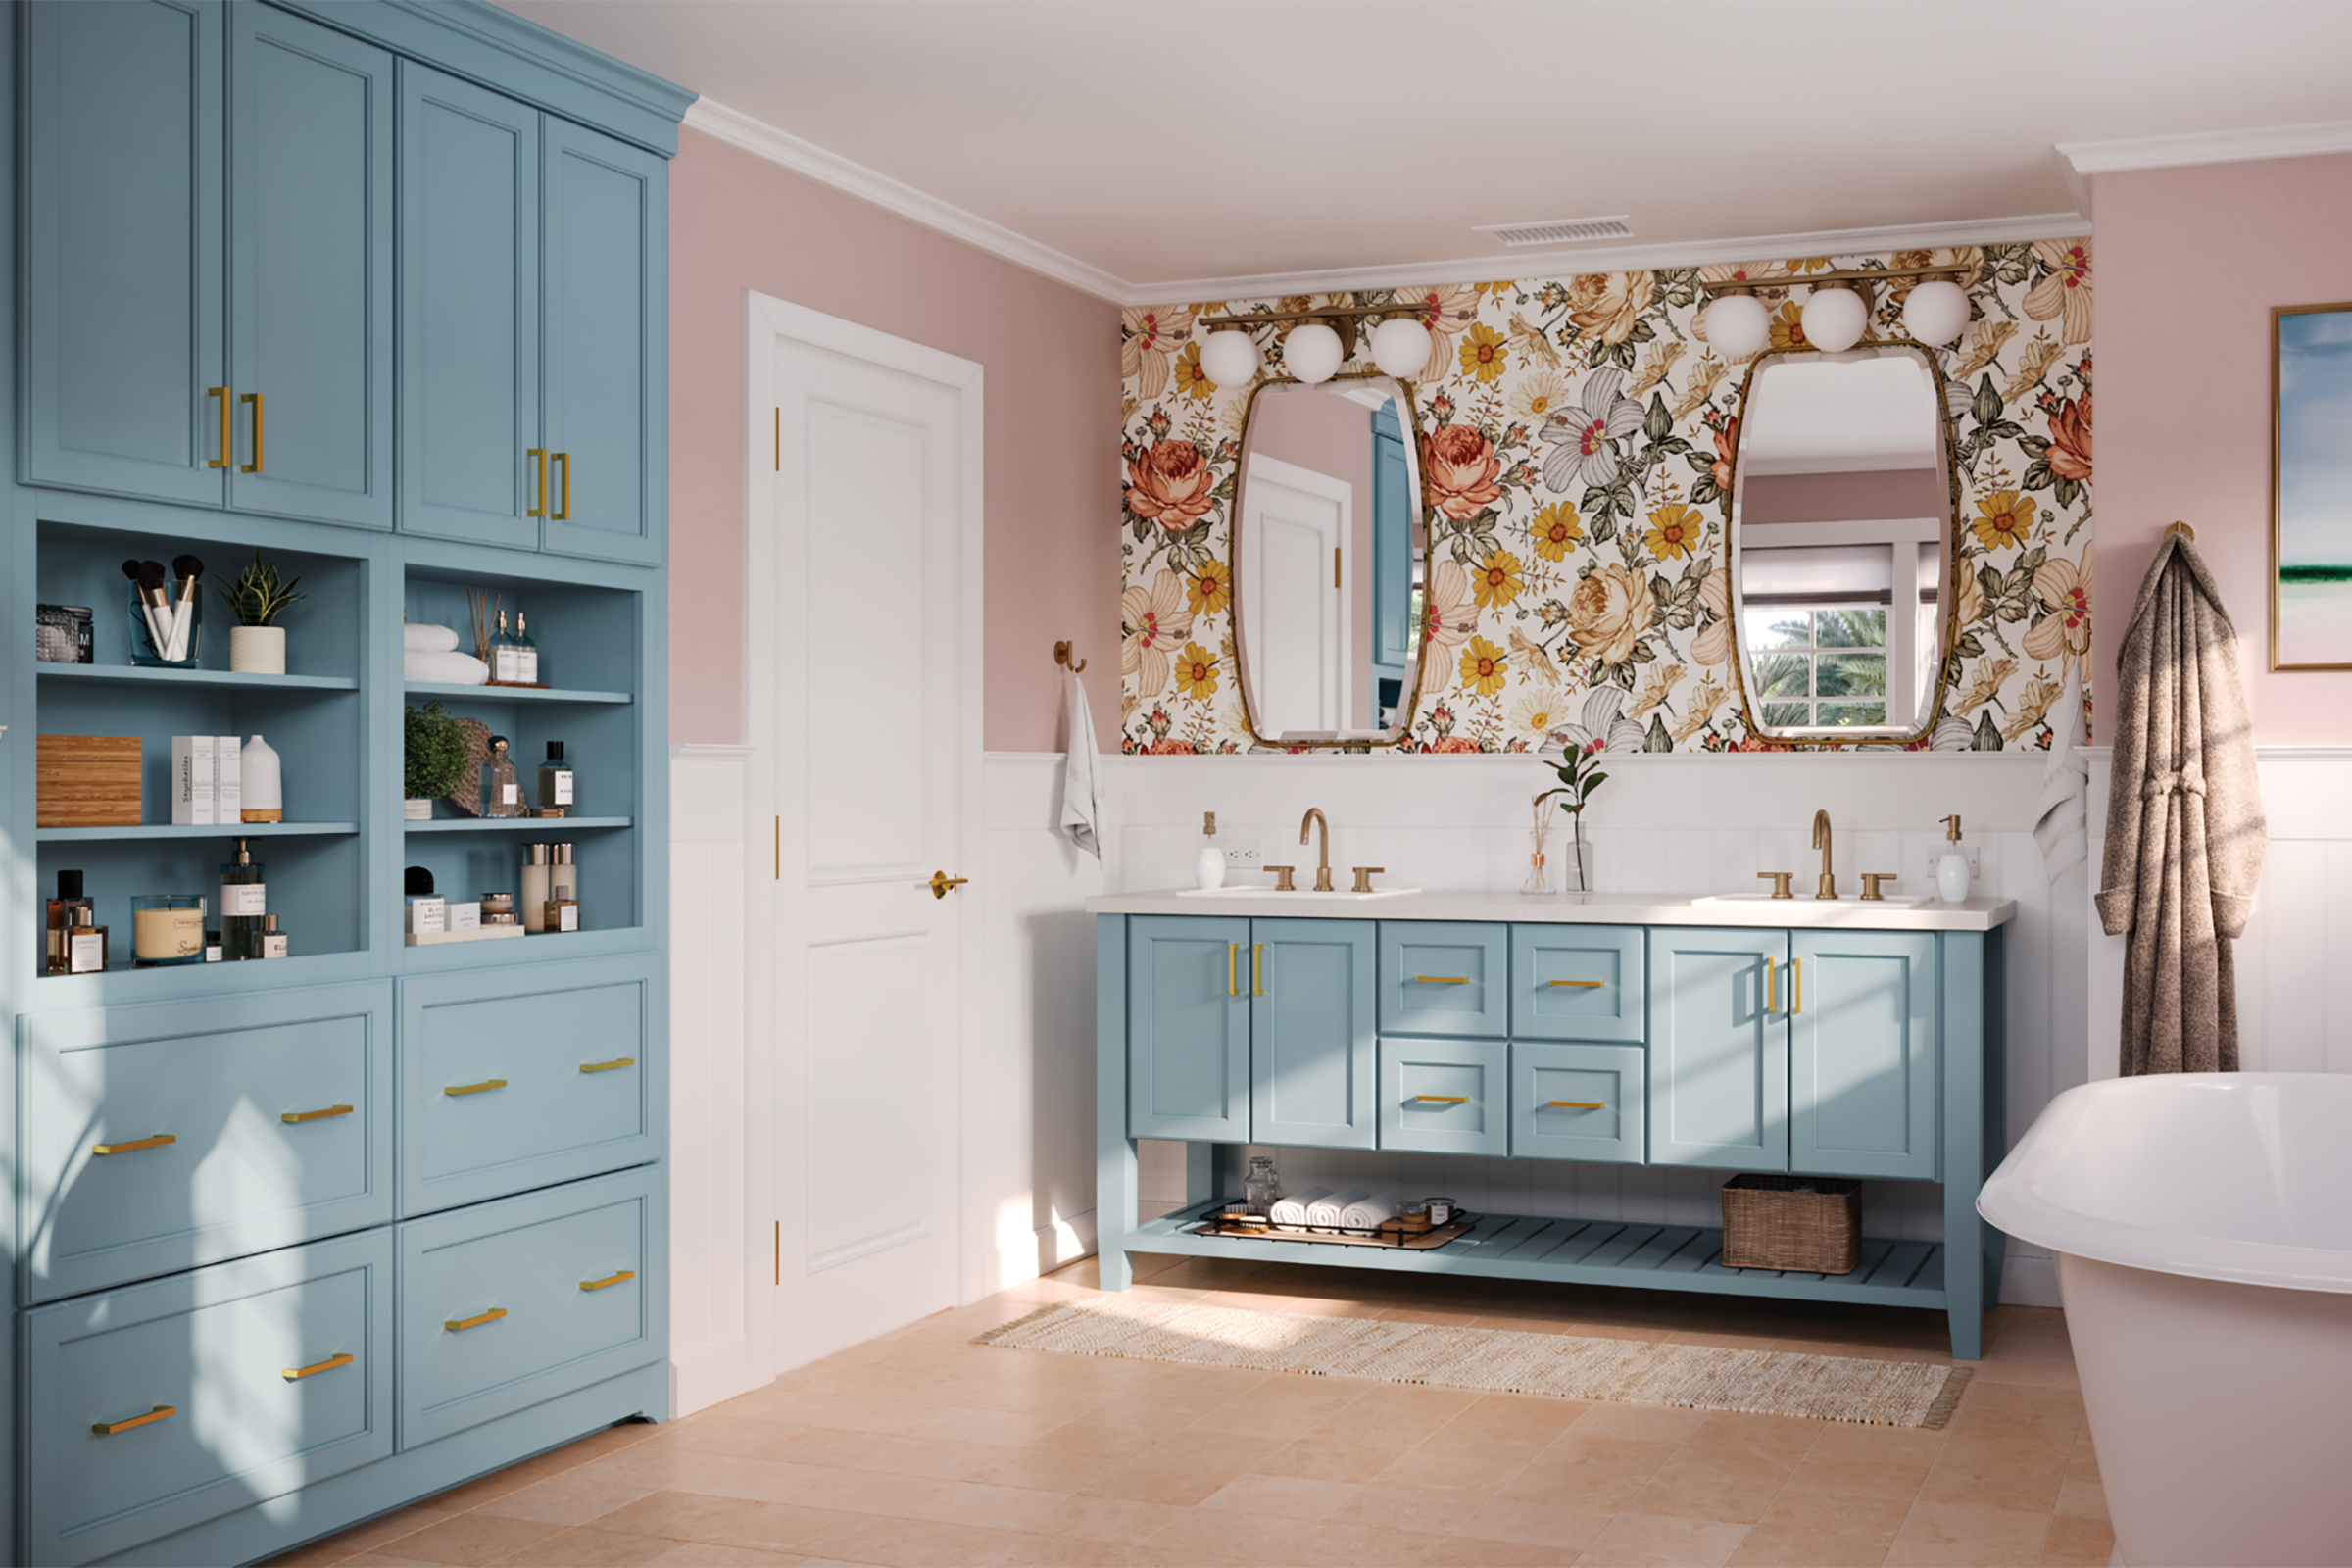 Colorful cottagecore bathroom with botanical wallpaper, pink wall accents, and KraftMaid cabinetry in Caribbean blue paint